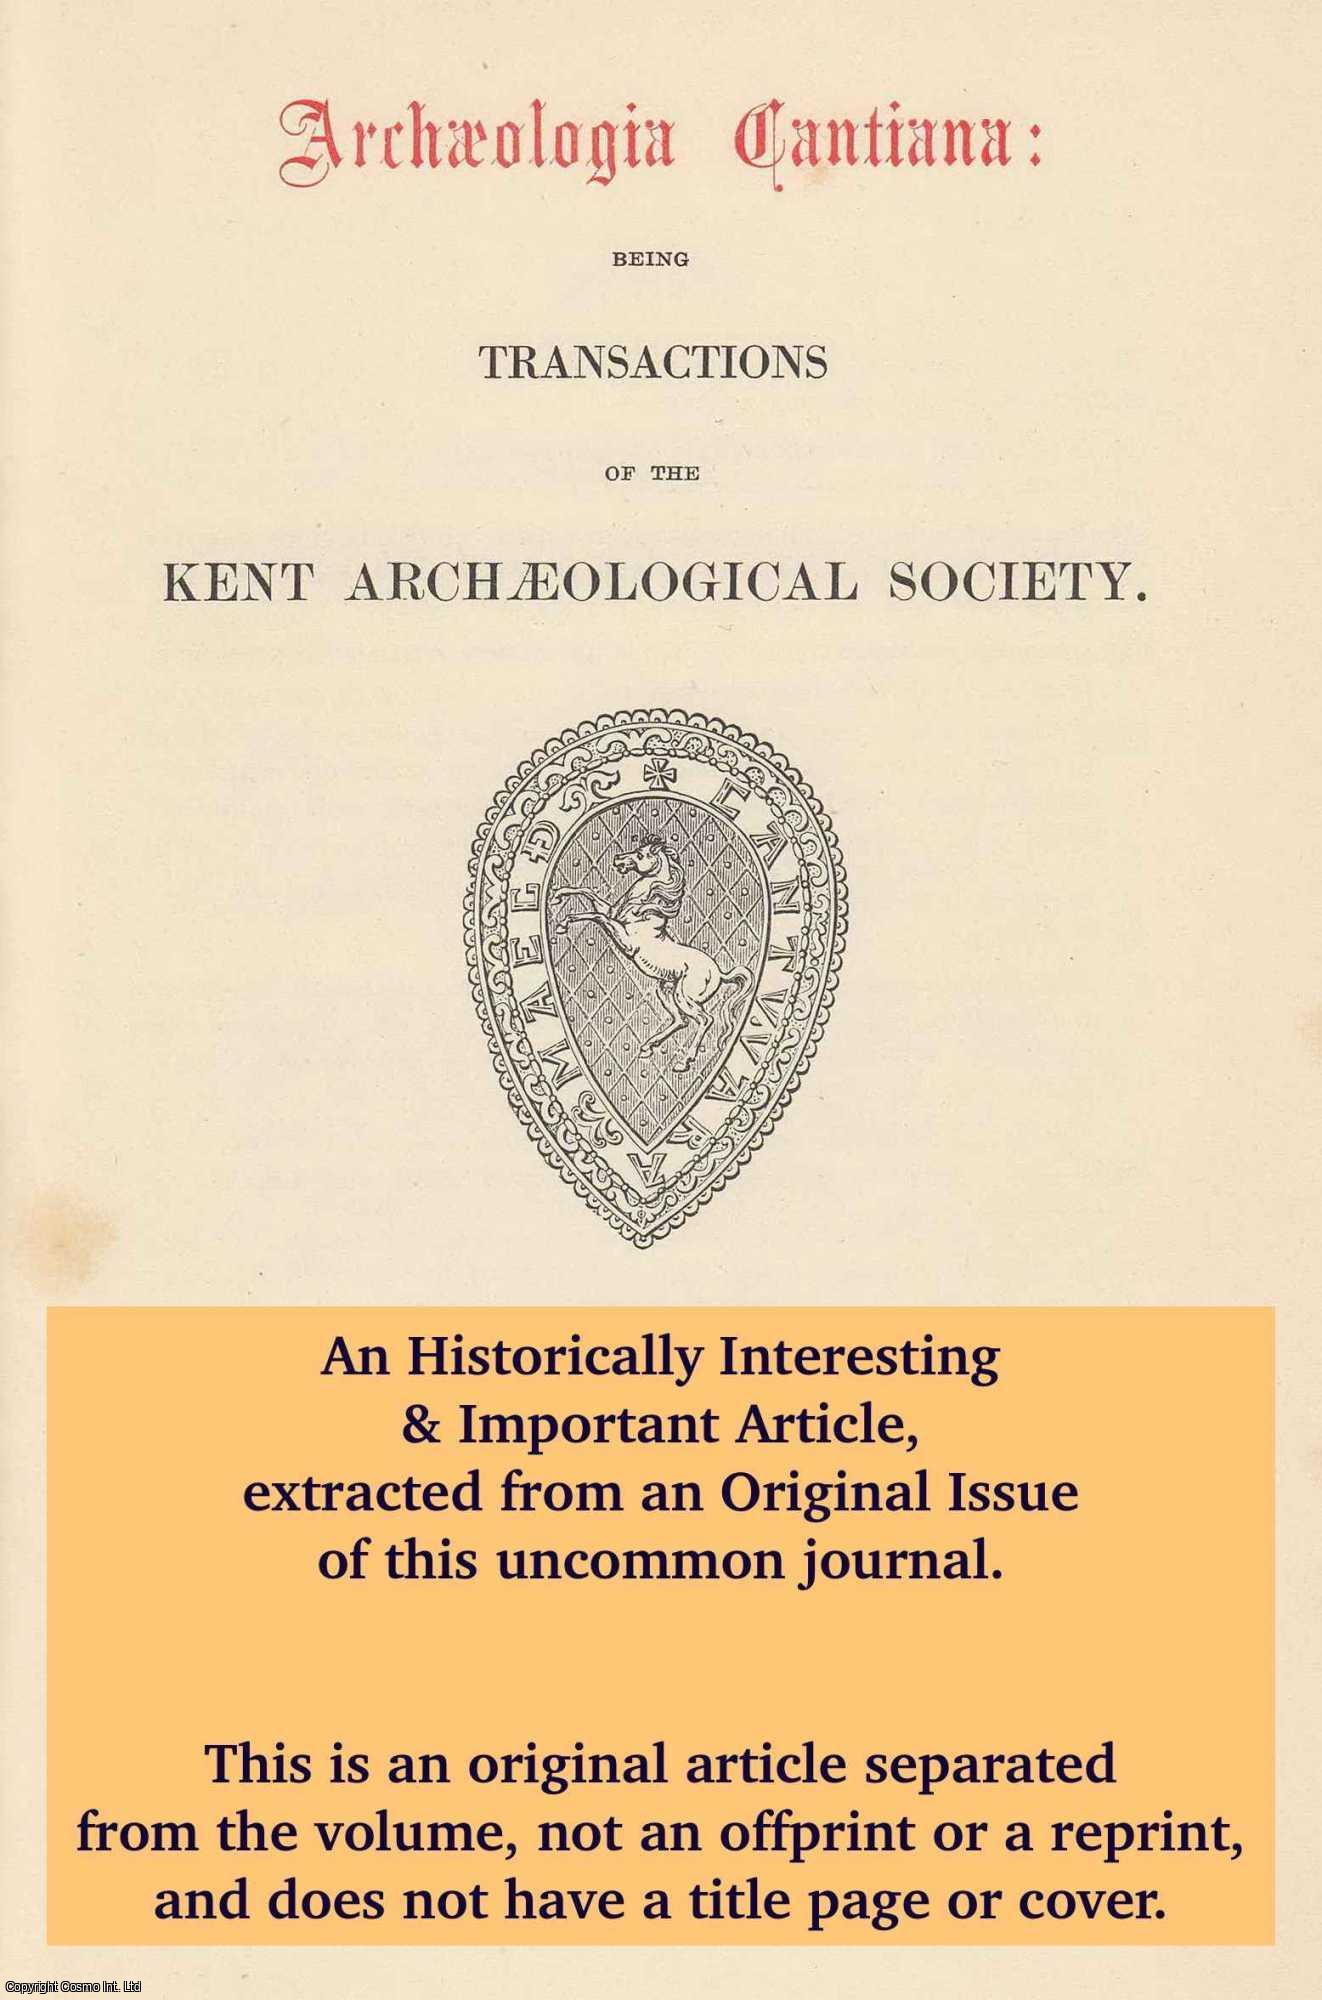 D.R.J. Perkins, N. MacPherson-Grant and E. Healey - Monkton Court Farm Evaluation, 1992. An original article from The Archaeologia Cantiana: Transactions of The Kent Archaeological Society, 1995.